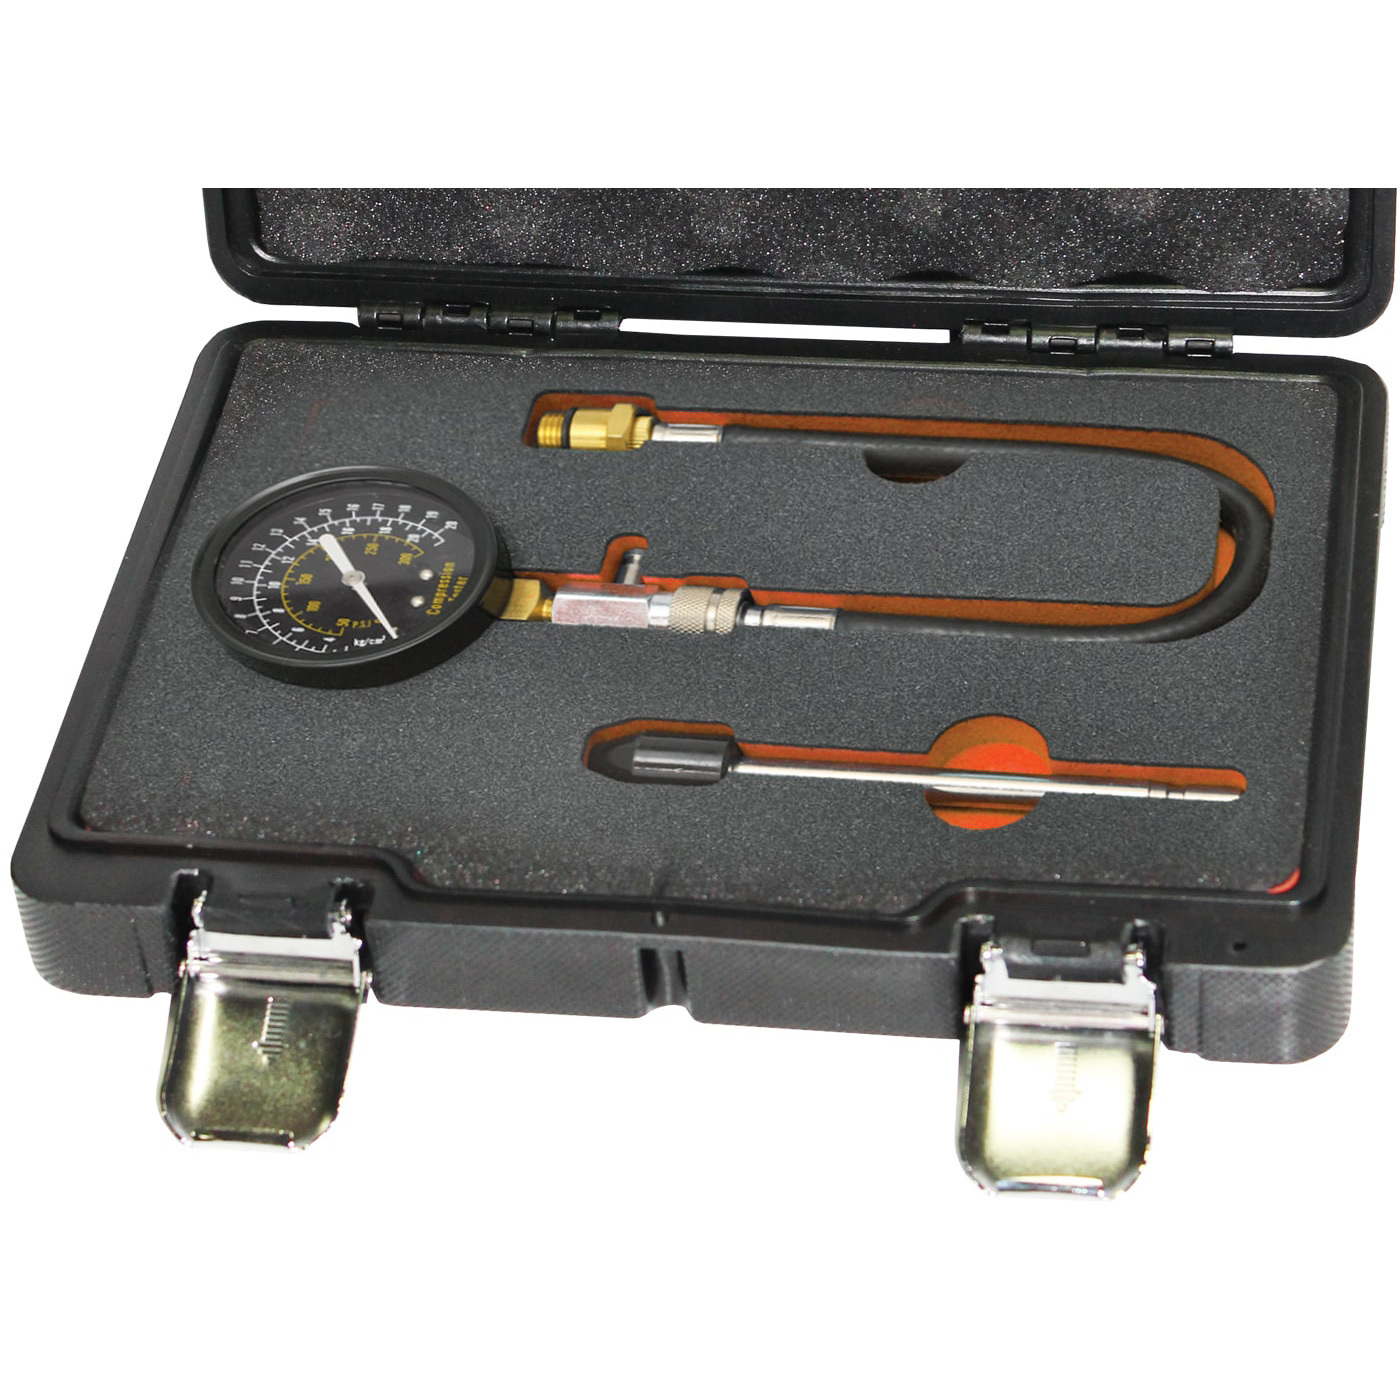 SP Tools Petrol Compression Tester Kit (Heavy Duty) SP66024